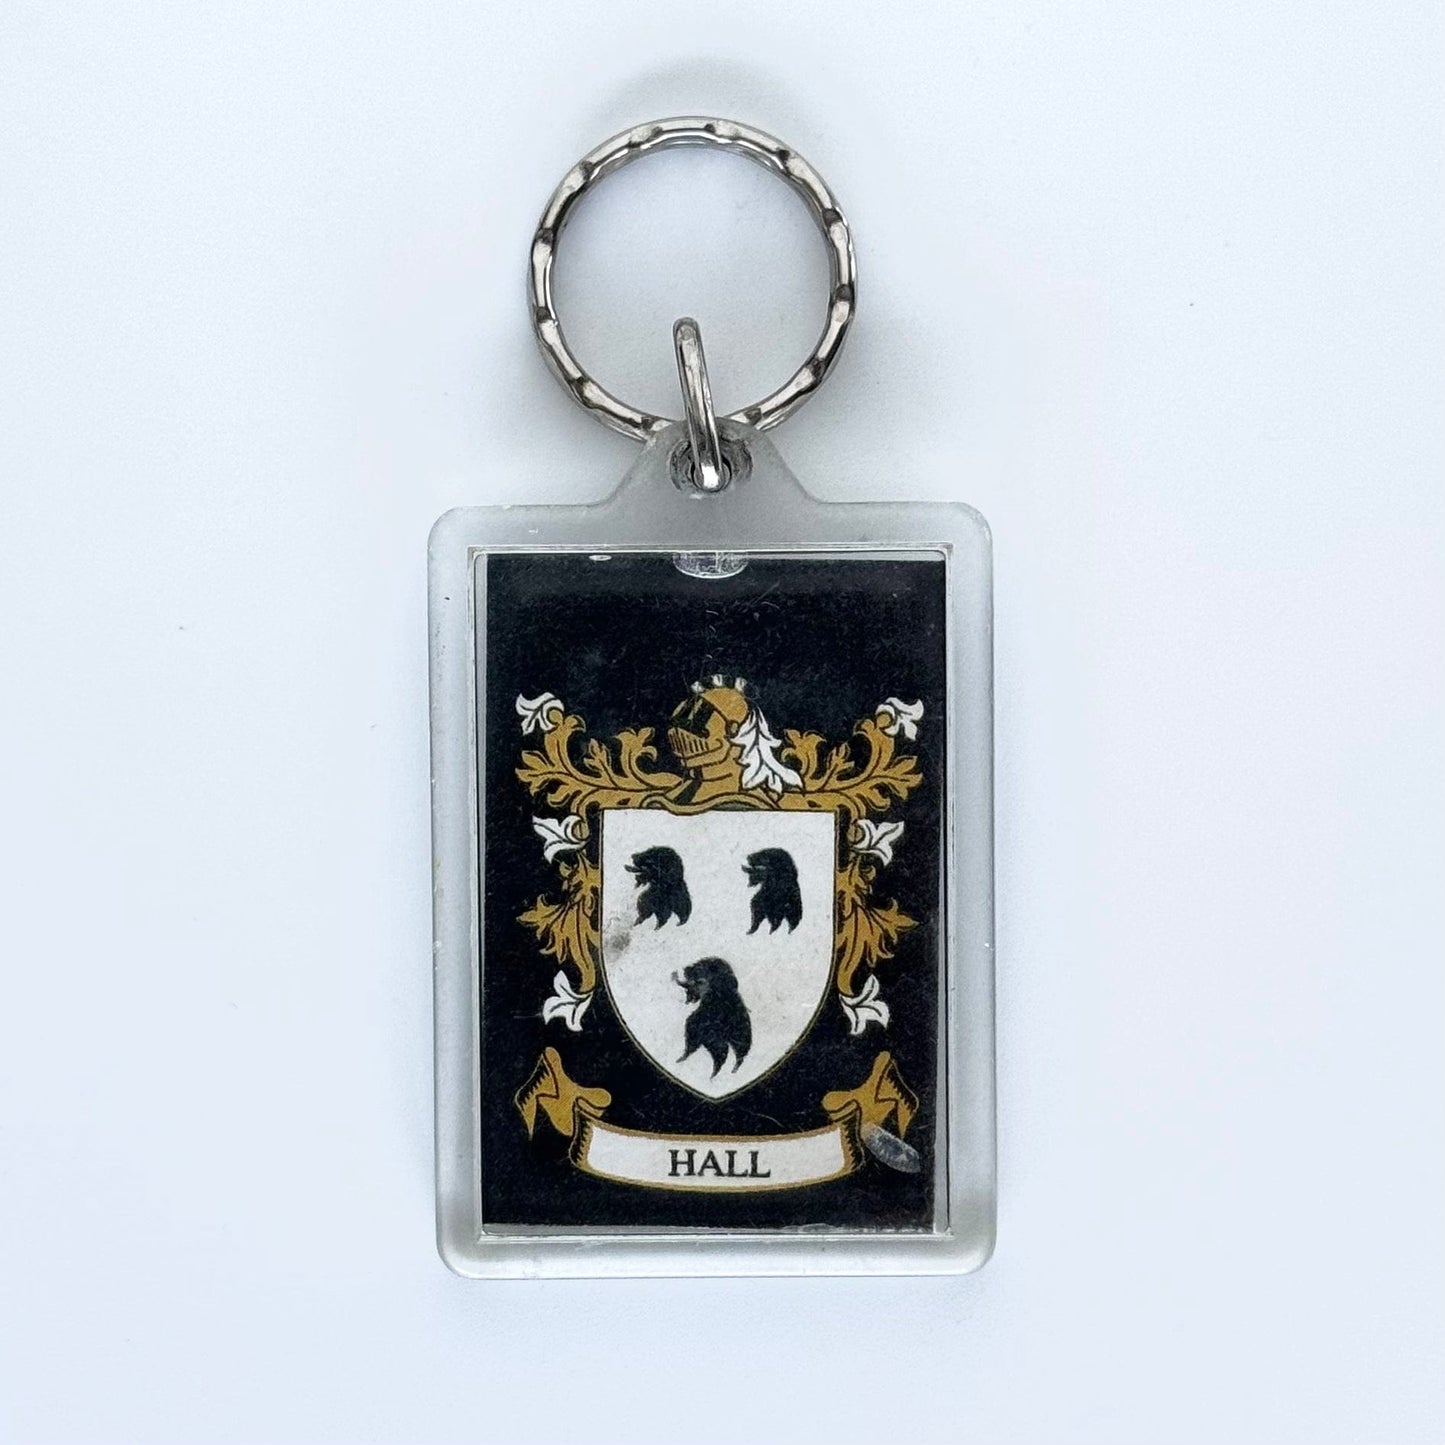 ‘Hall Family Crest’ Key Ring Rectangle Clear Acrylic, Good Condition